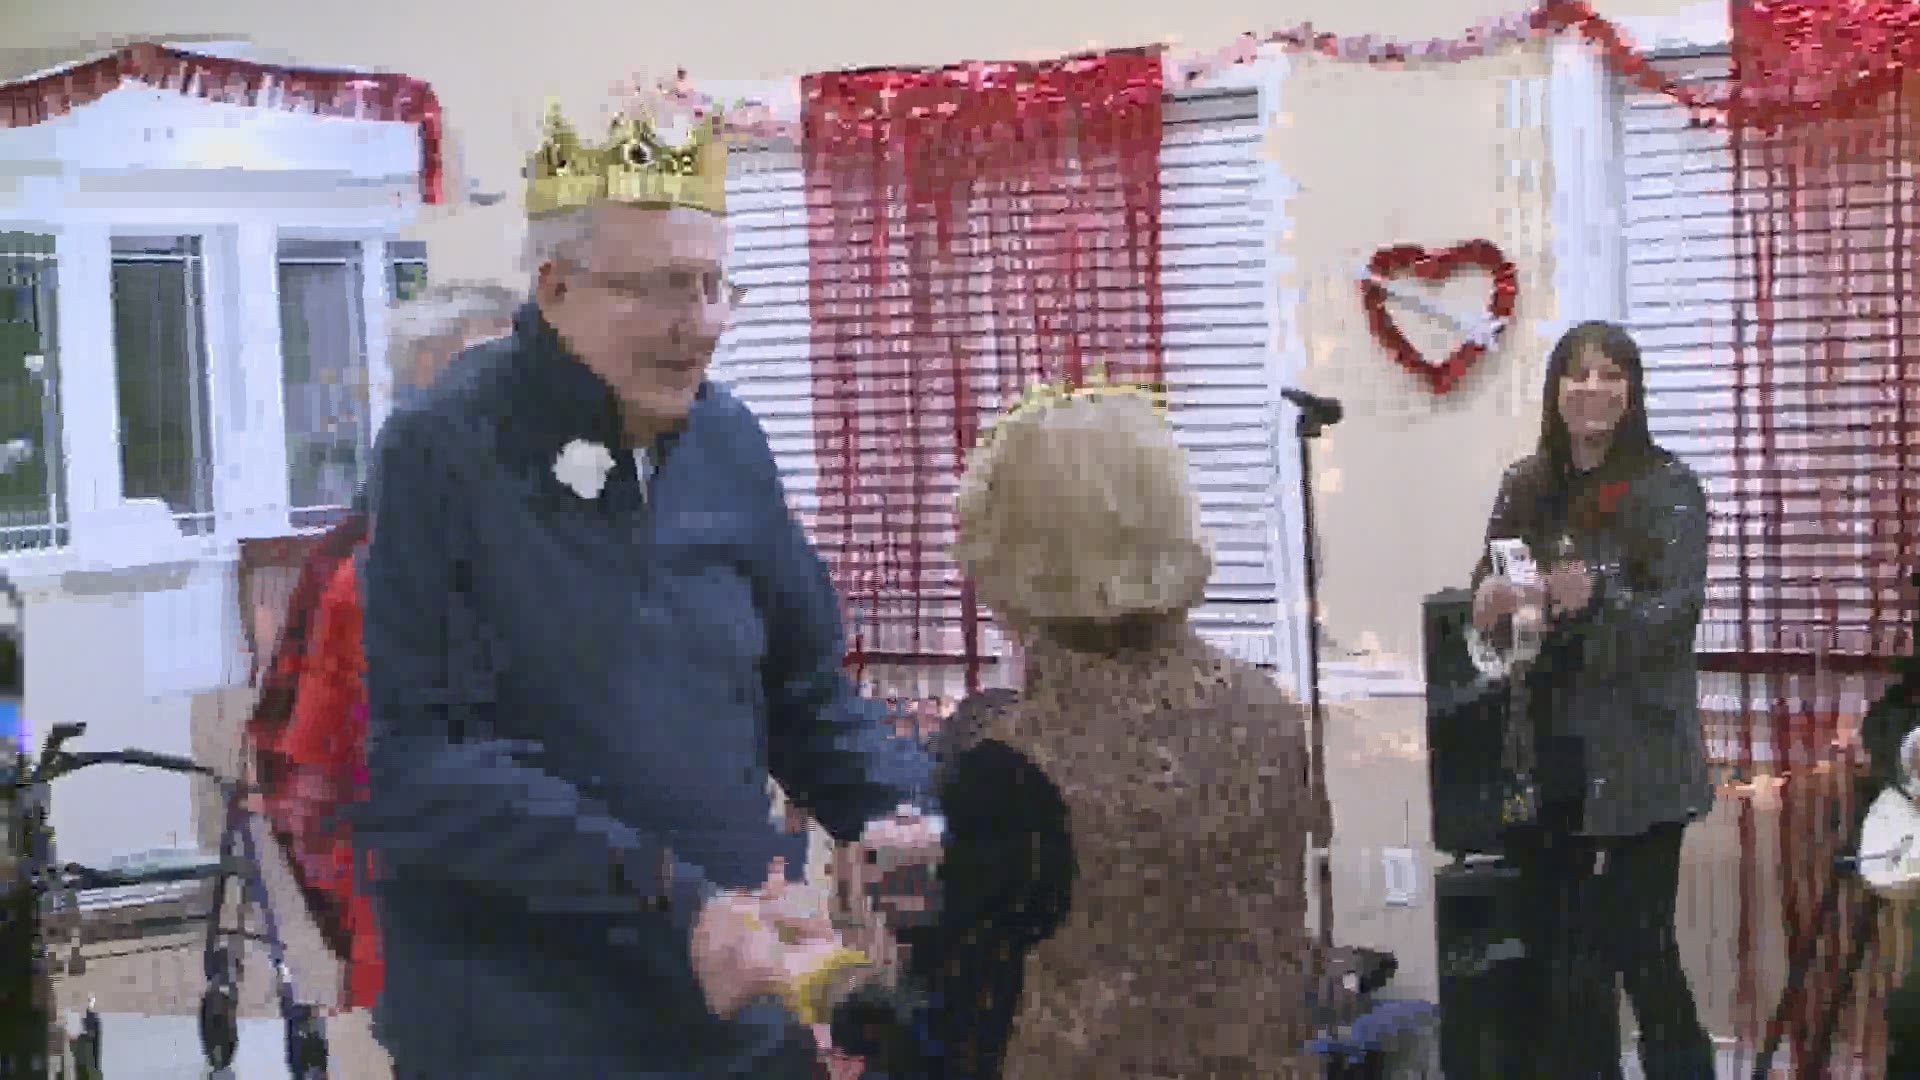 Residents of Highland Senior Living celebrated Valentine's Day by having their annual prom.